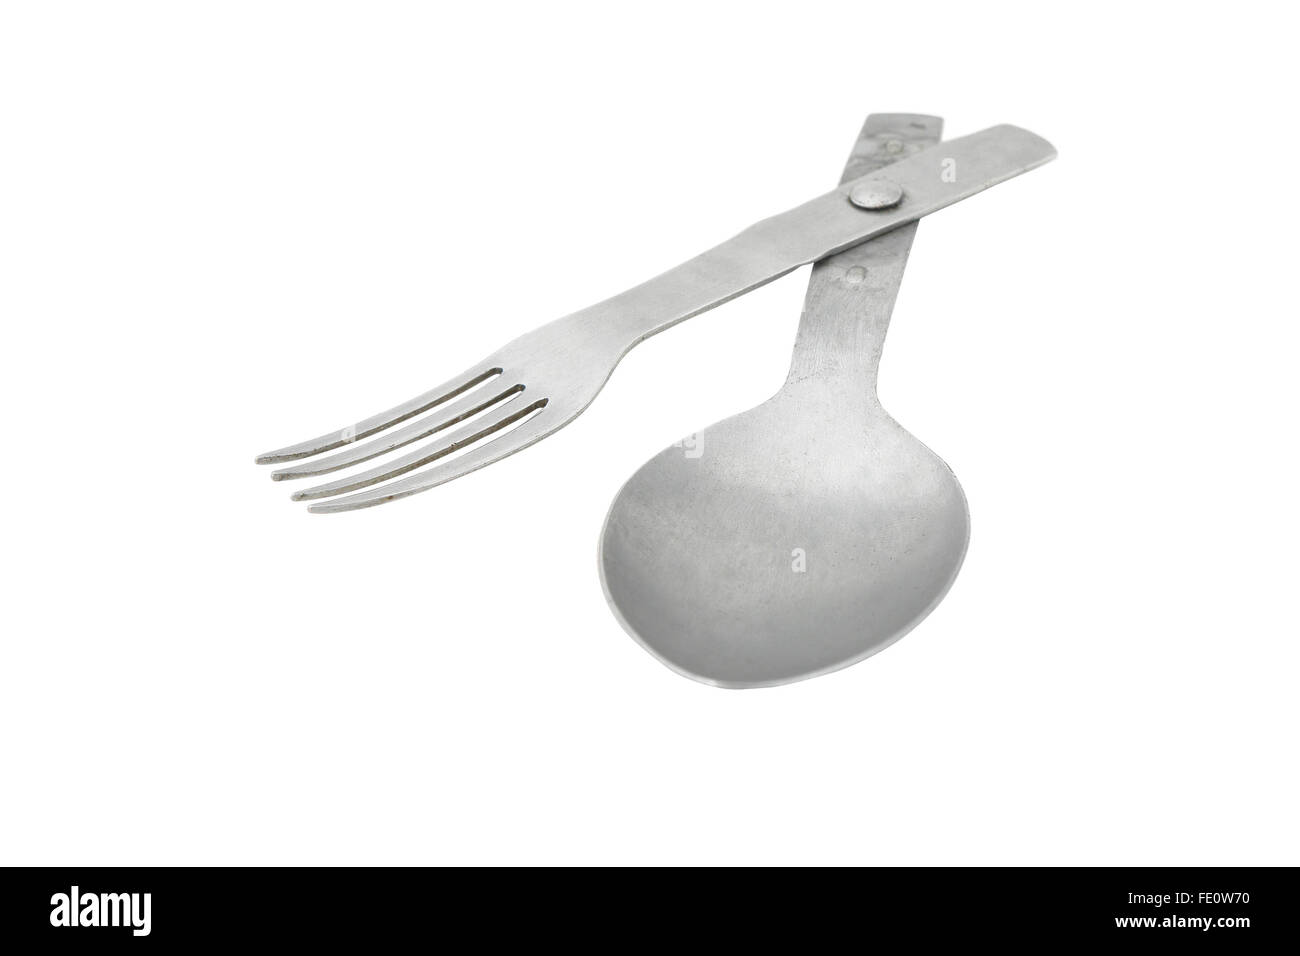 The German army fork spoon eating utensil. WW2 period. On the white background. Stock Photo